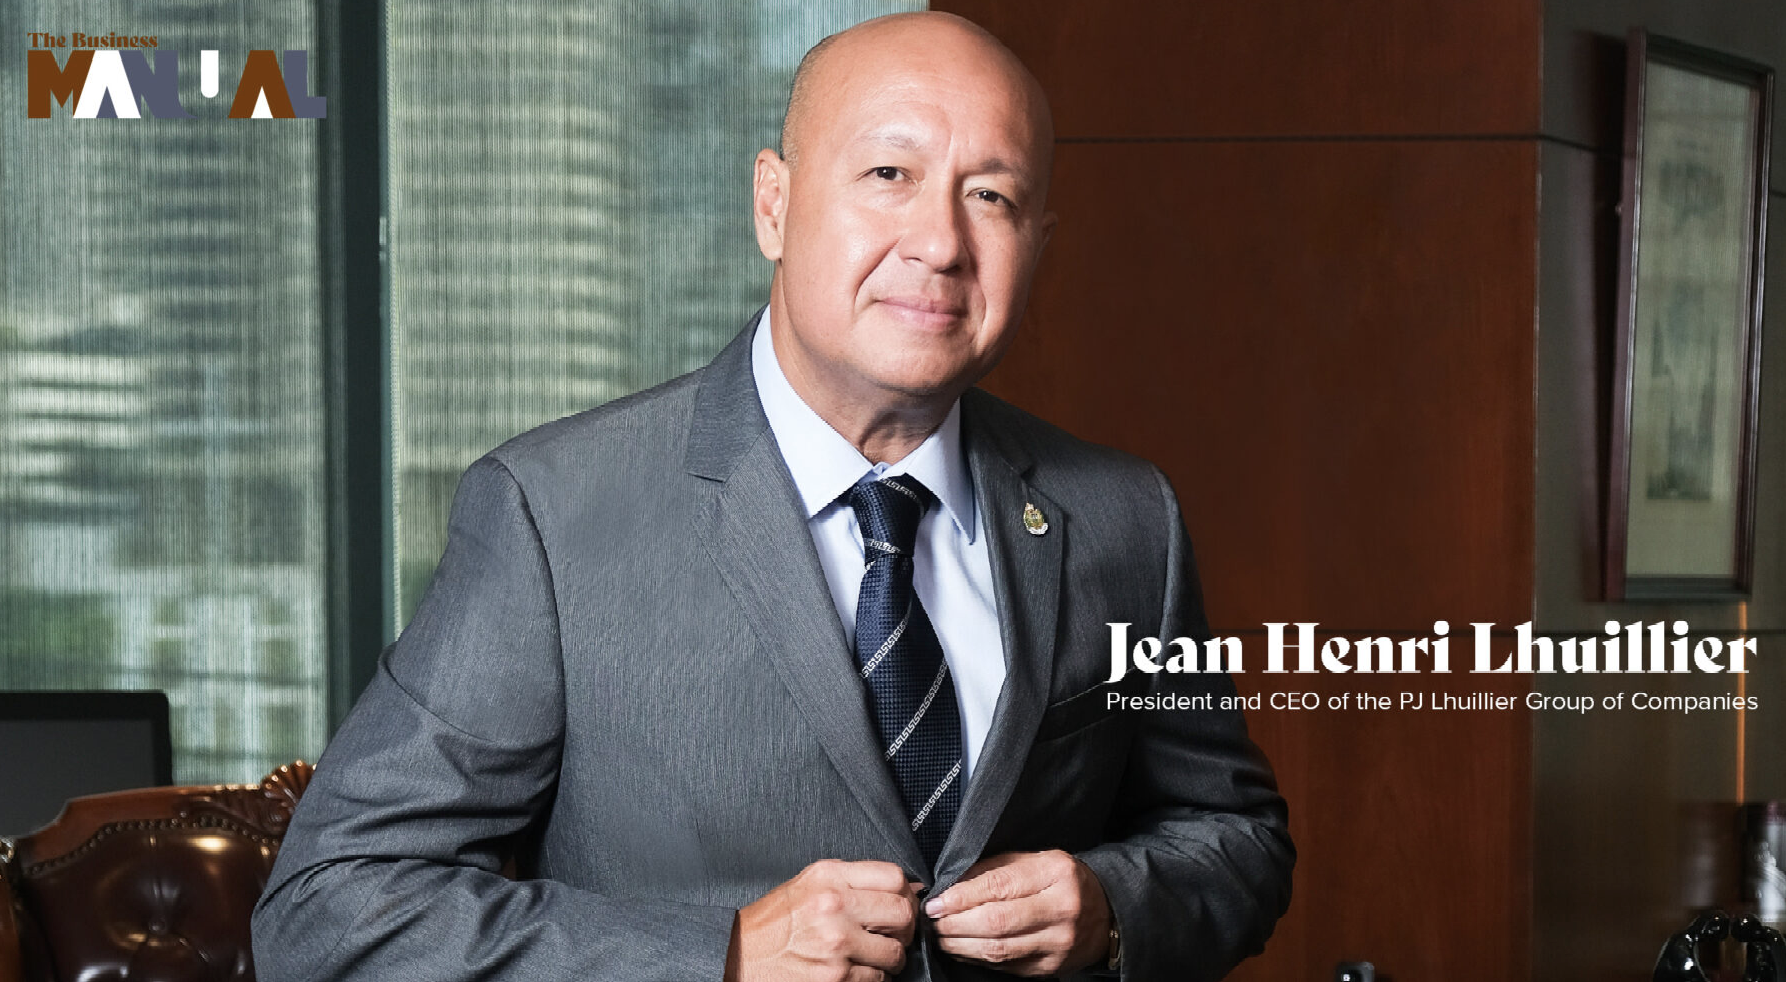 From Pawn to King: Strategically Growing a Family Business Into an Empire, According to Jean Henri Lhuillier of PJ Lhuillier Group of Companies